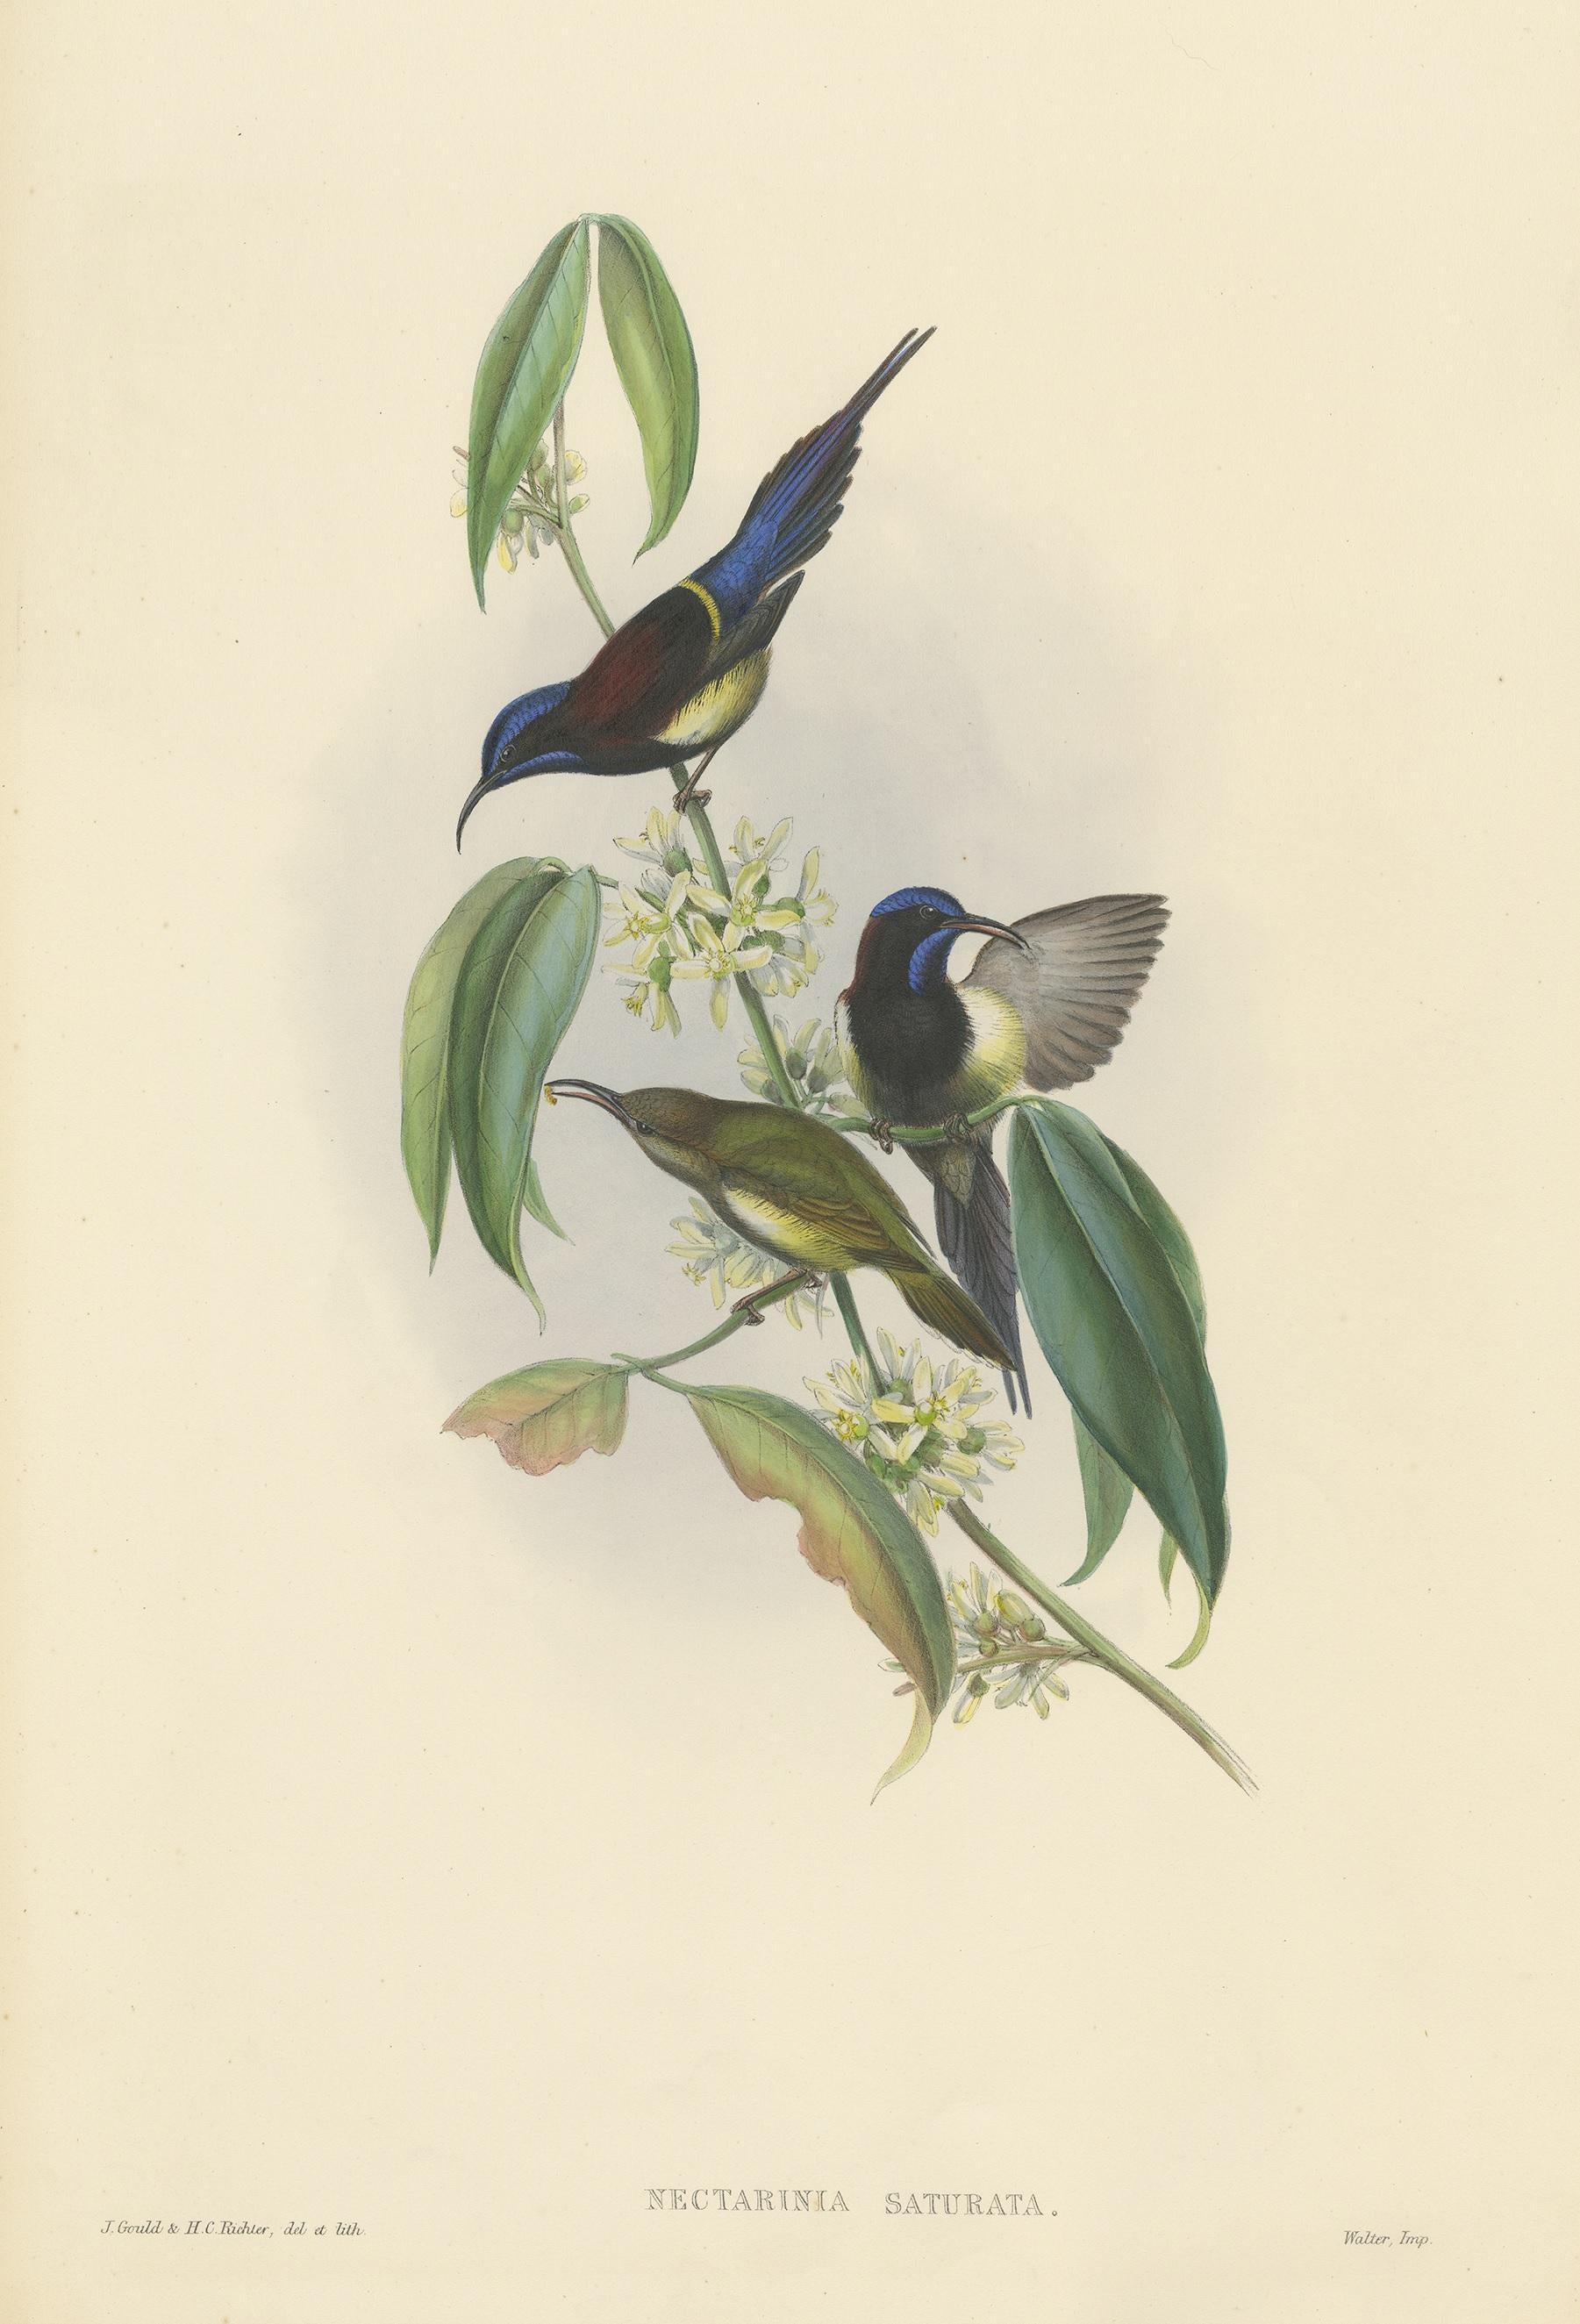 Antique bird print titled 'Nectarinia Saturata'. Original lithograph of the black-breasted sunbird. This print originates from 'Birds of Asia' by John Gould. Published 1850-1853.